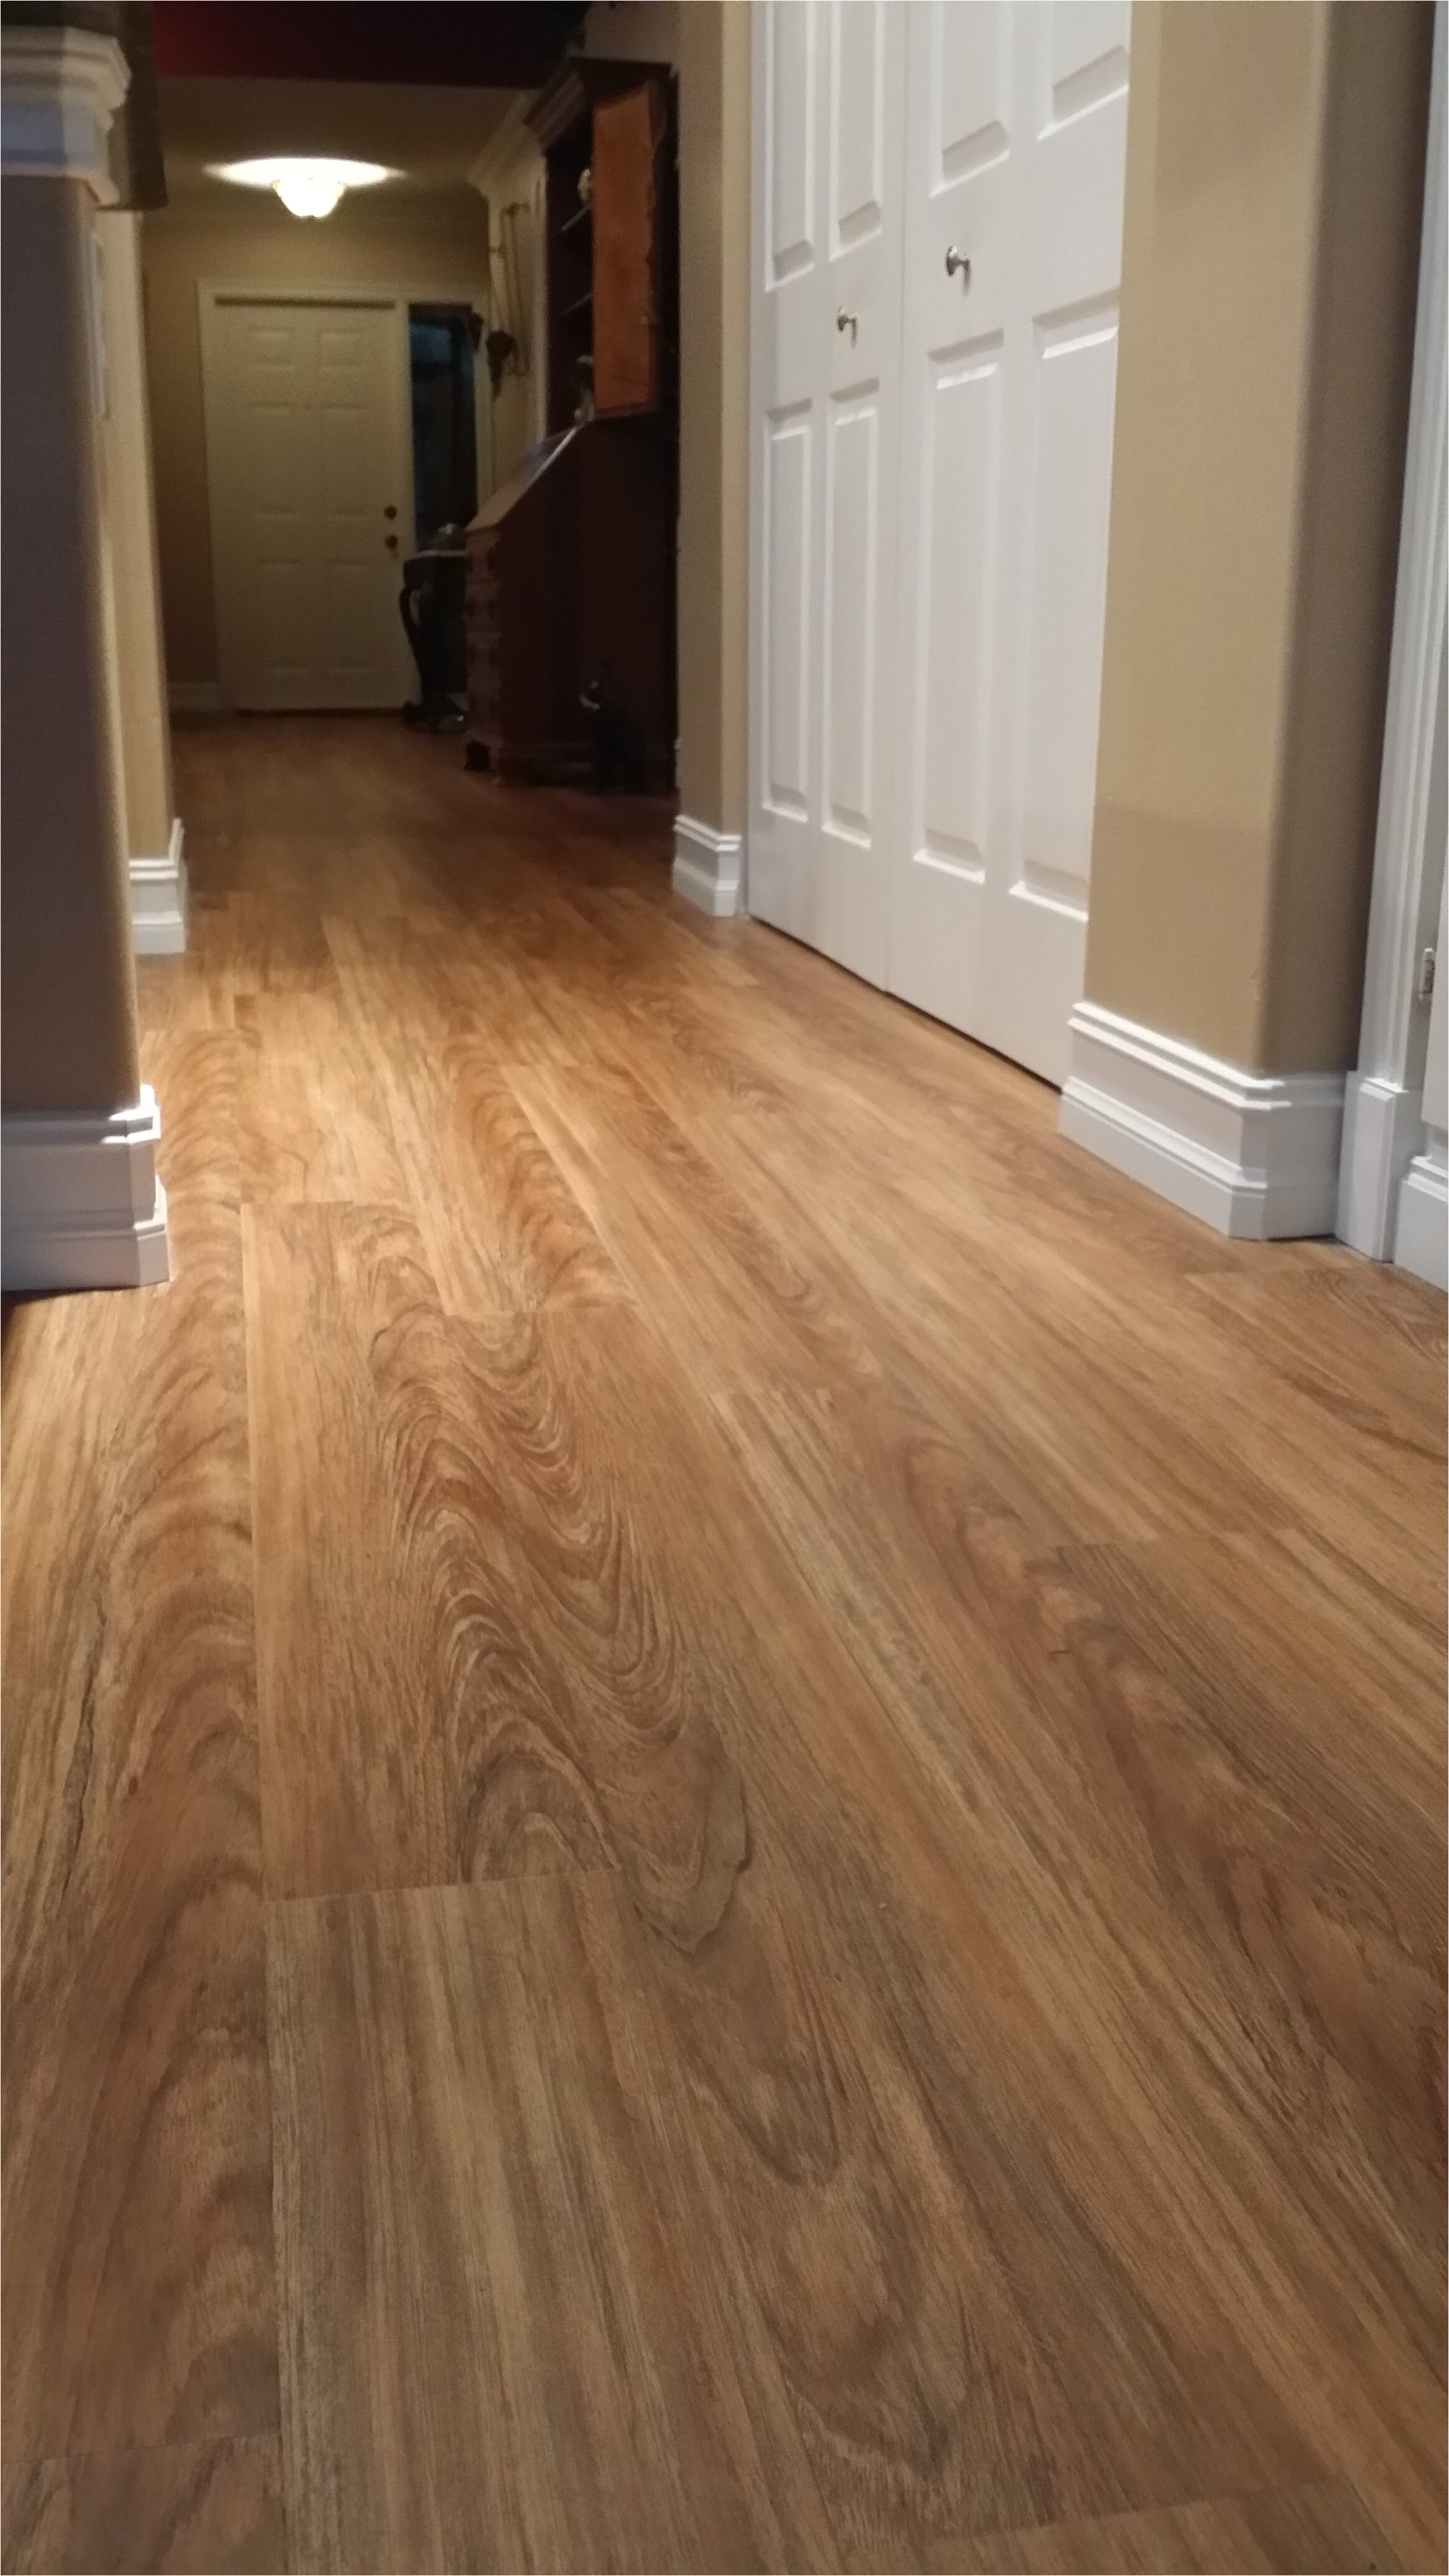 new engineered vinyl plank flooring called classico teak from shaw that we recently installed for butch and nancy d in lake worth fl